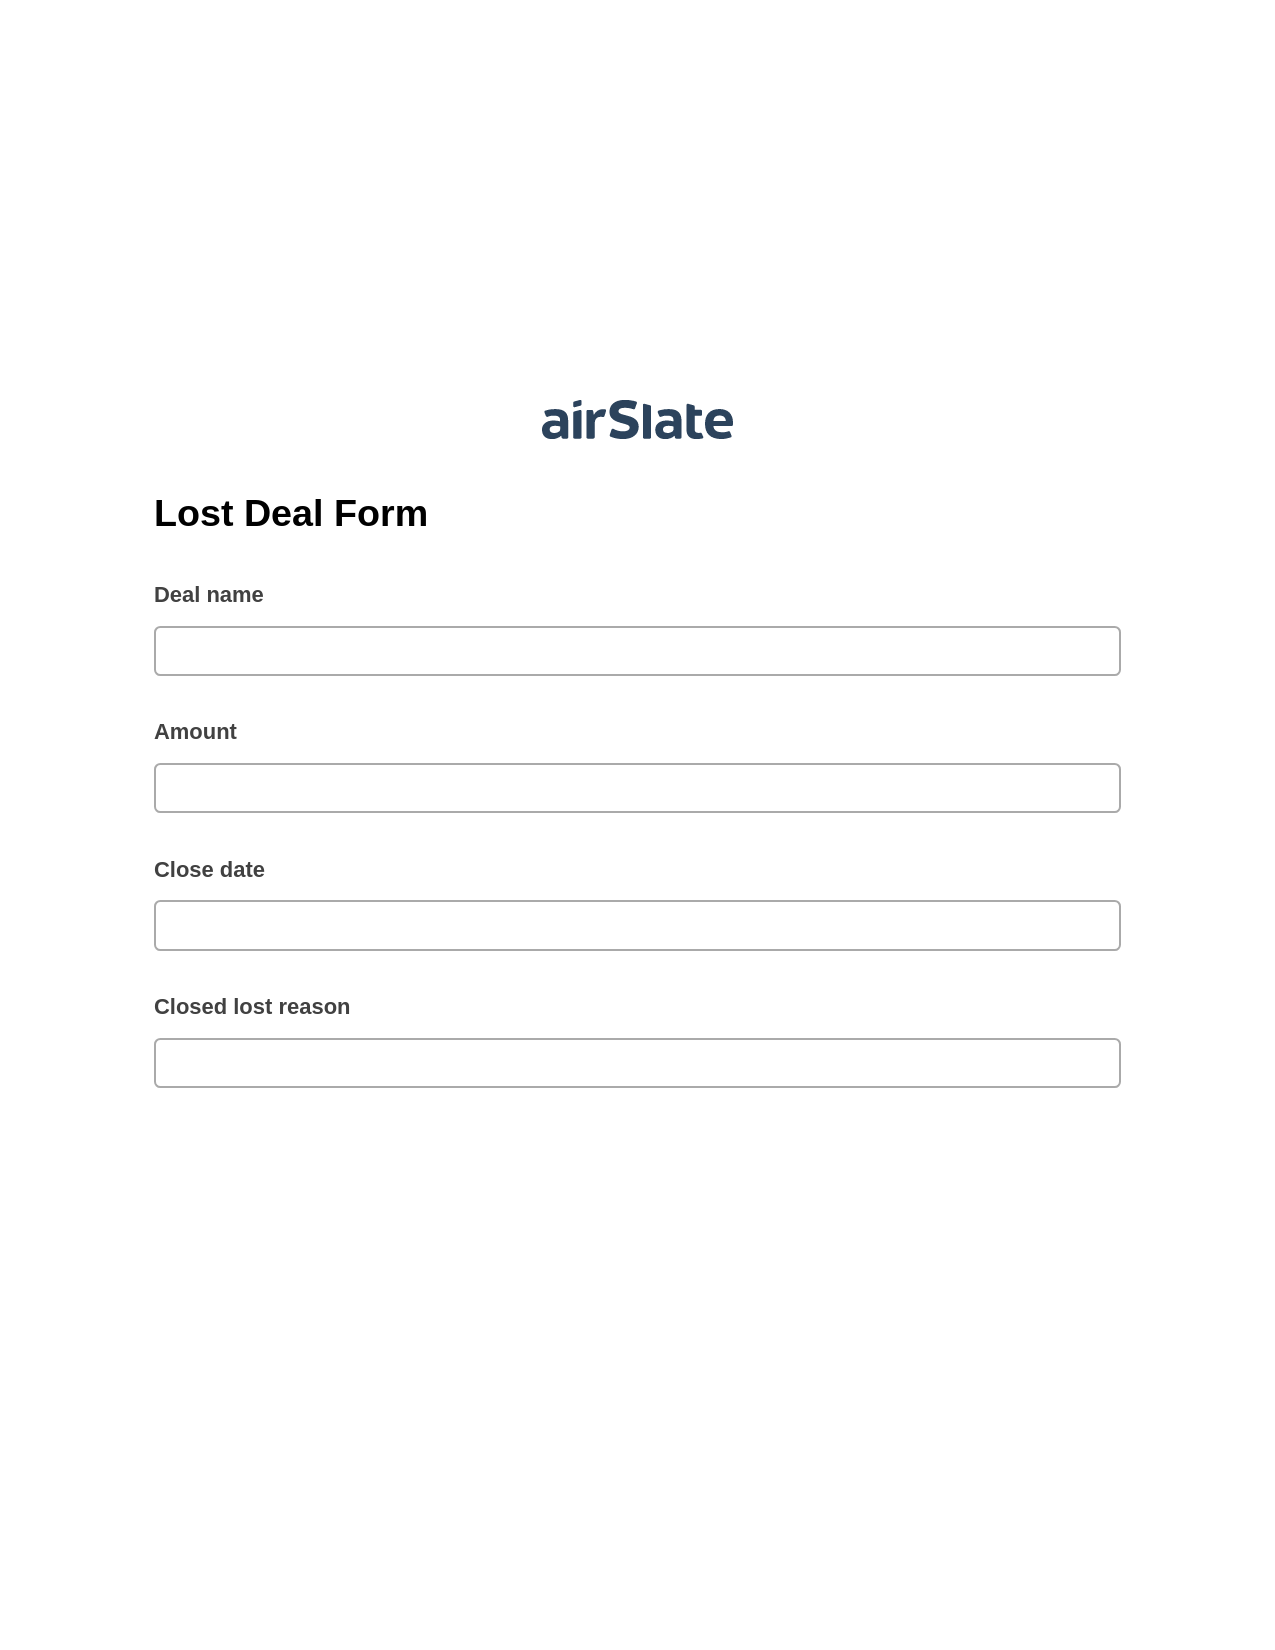 Lost Deal Form Pre-fill from Google Sheets Bot, SendGrid send Campaign bot, Archive to Box Bot